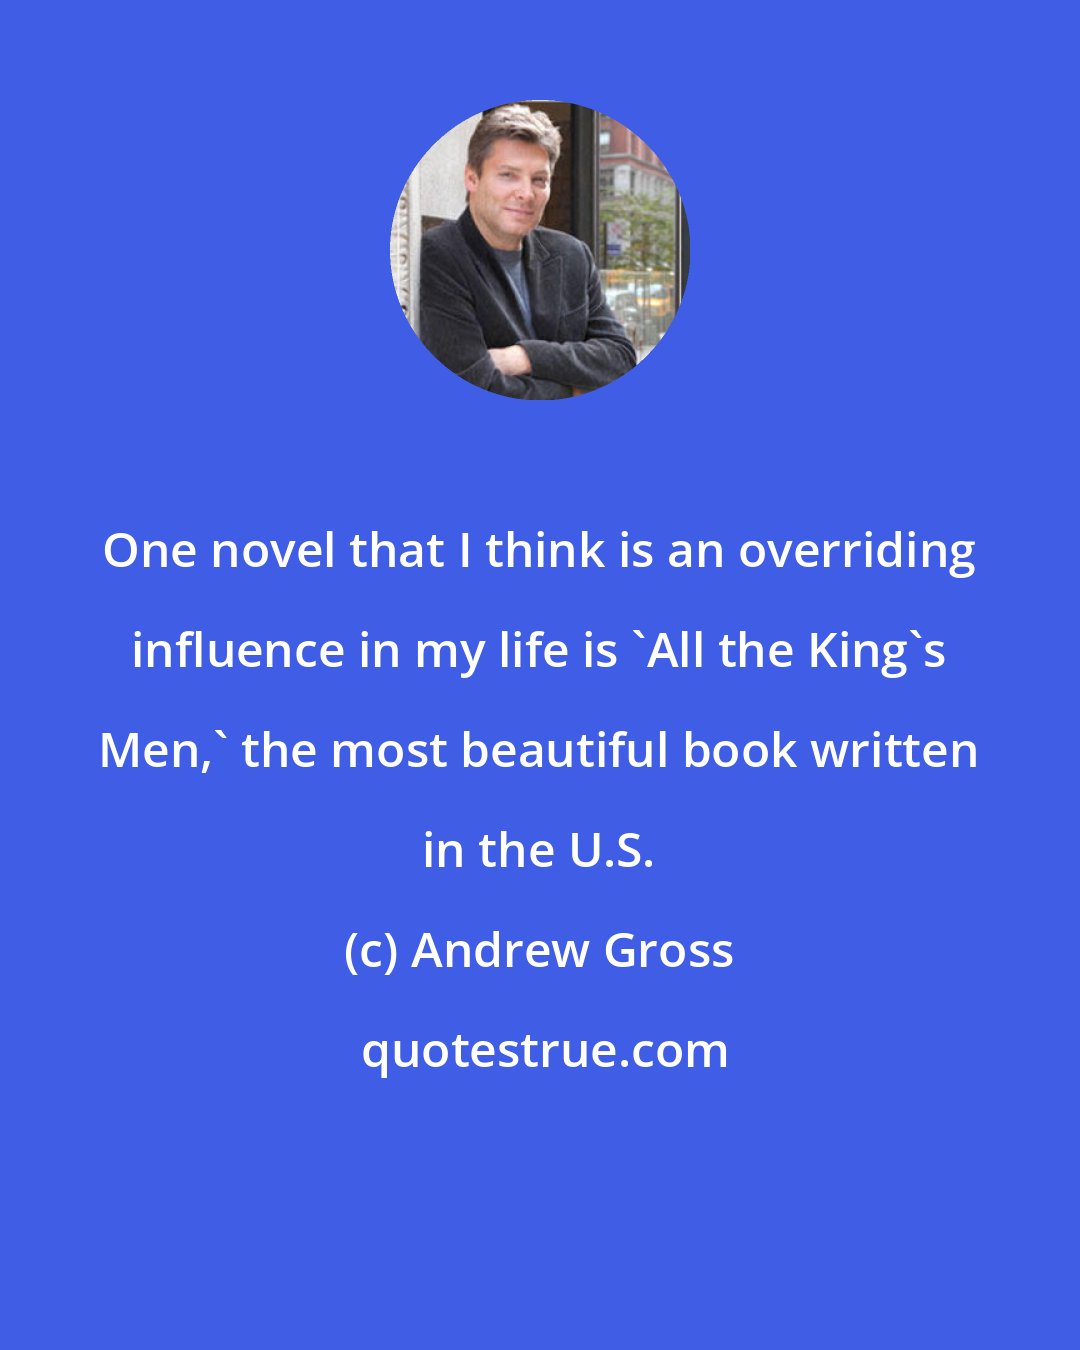 Andrew Gross: One novel that I think is an overriding influence in my life is 'All the King's Men,' the most beautiful book written in the U.S.